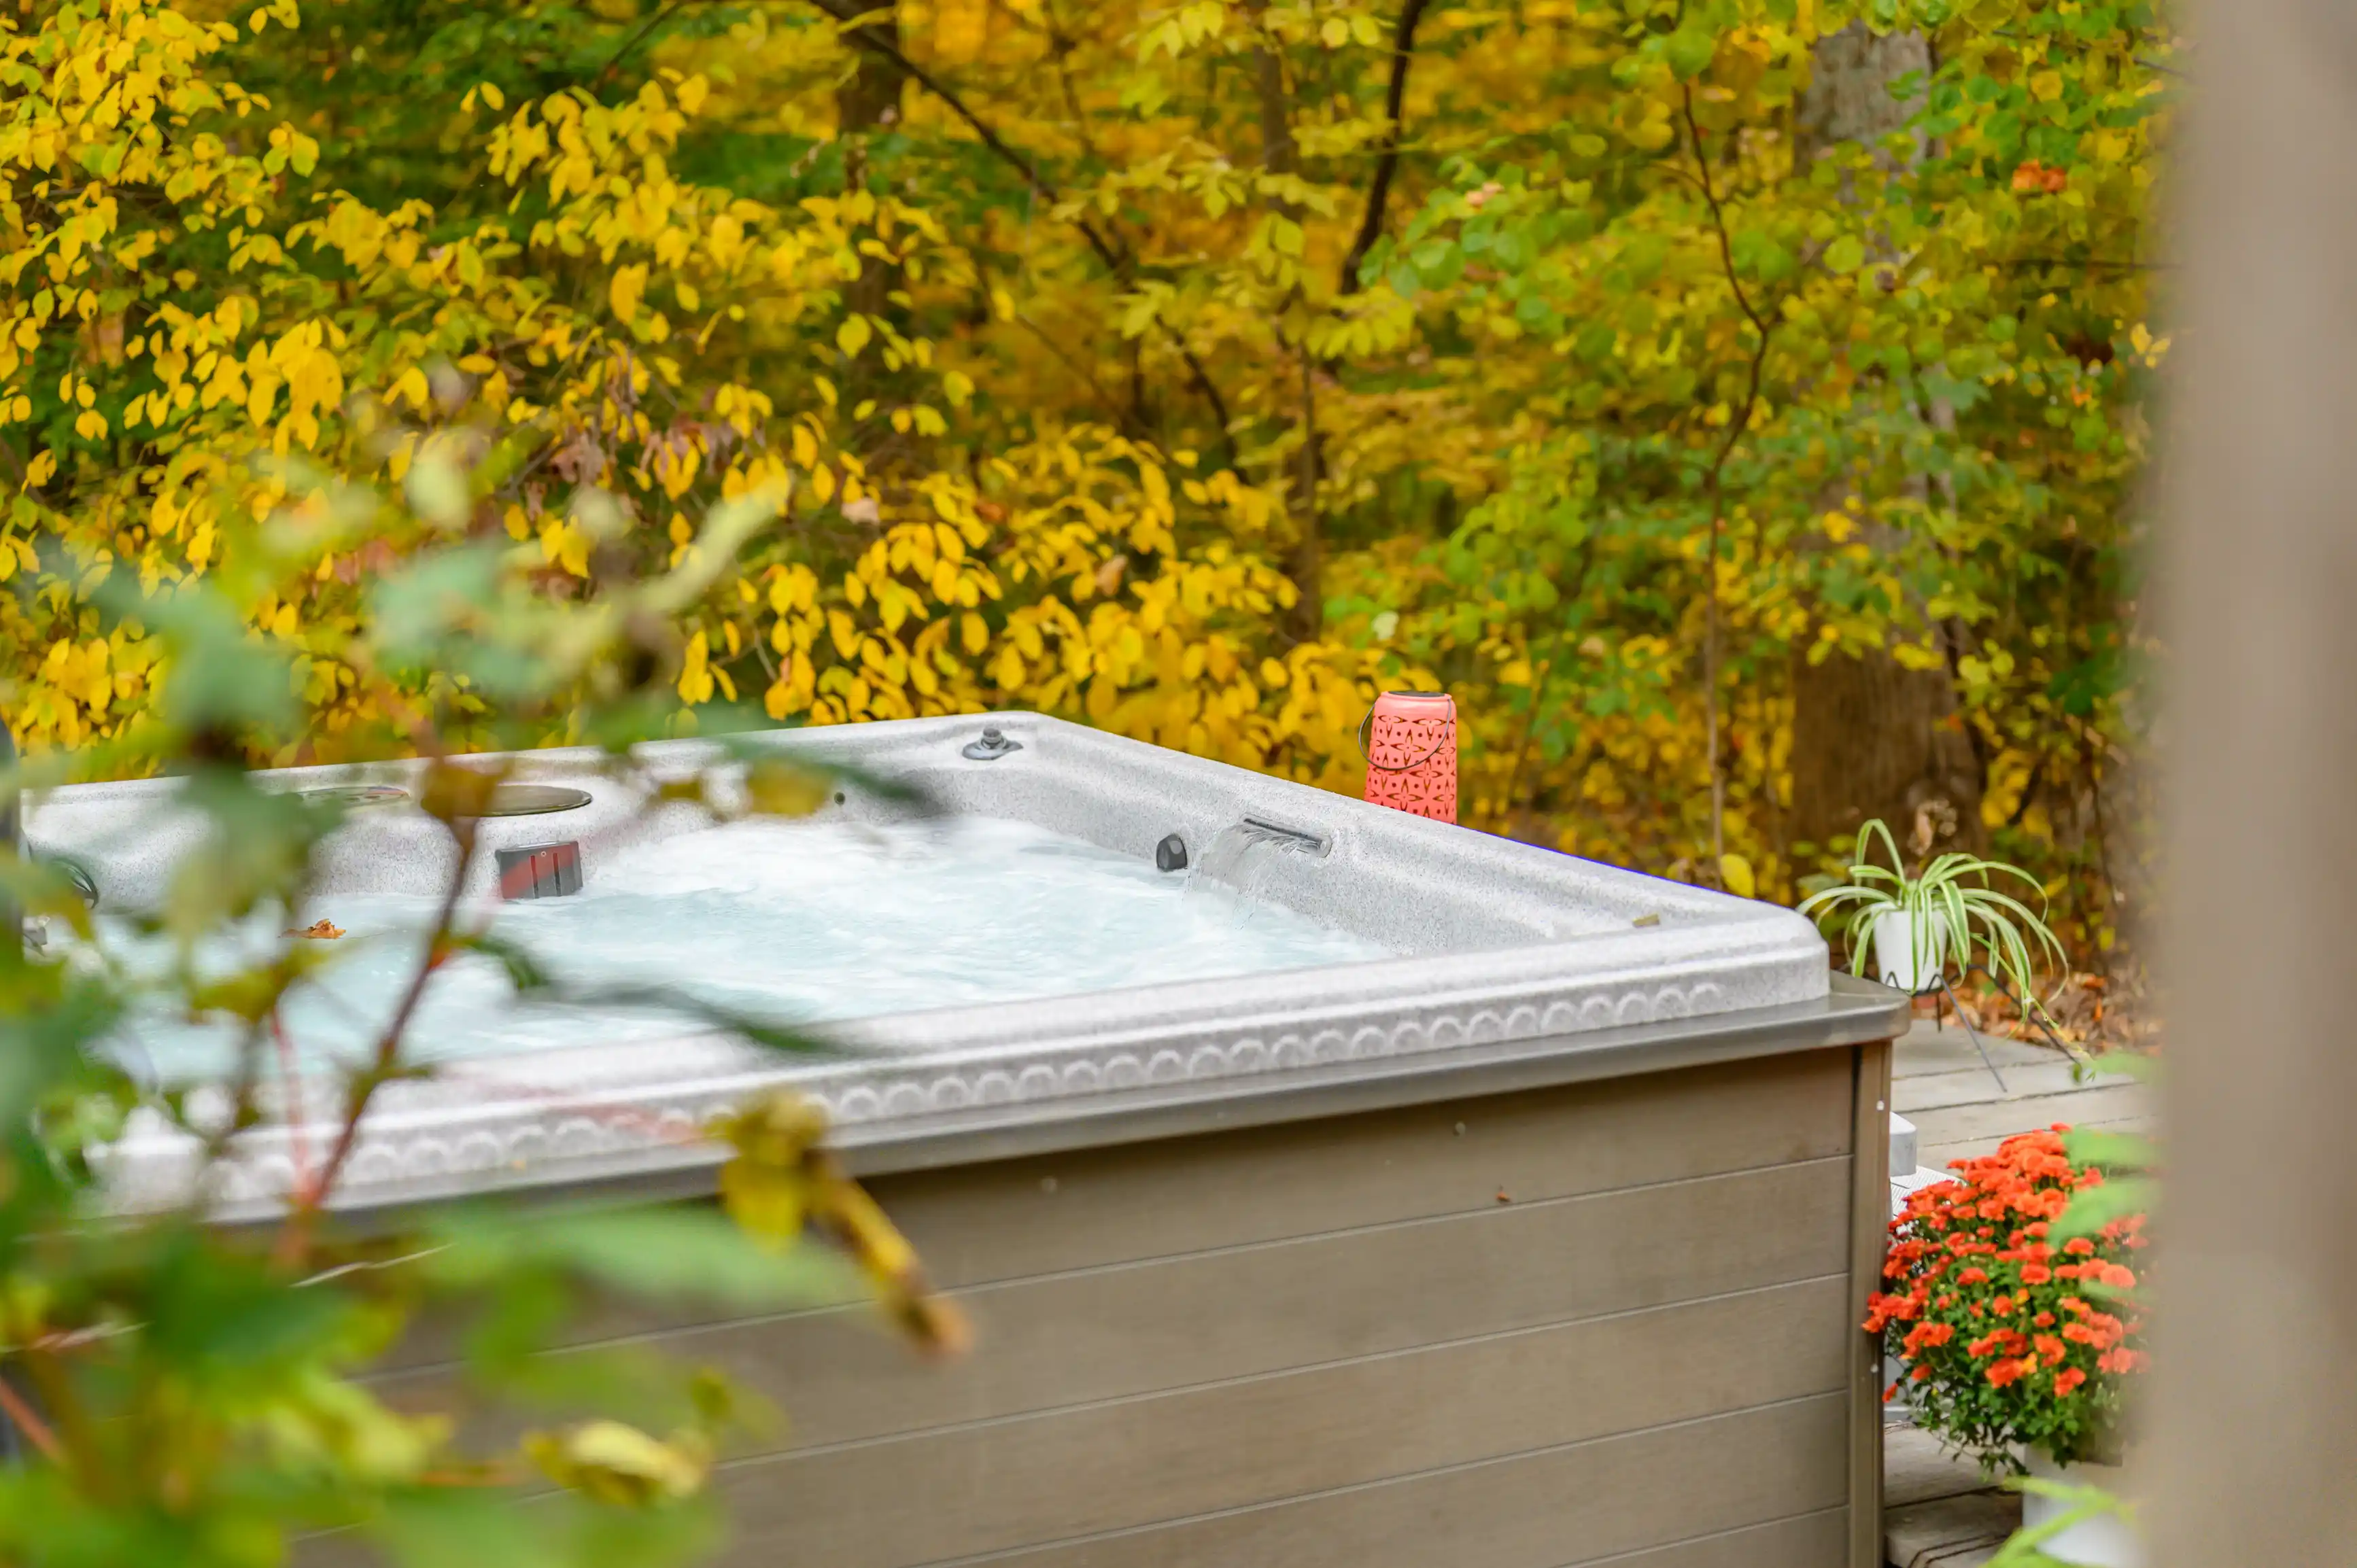 Outdoor hot tub with a cover on a wooden deck surrounded by autumn foliage and blooming flowers.